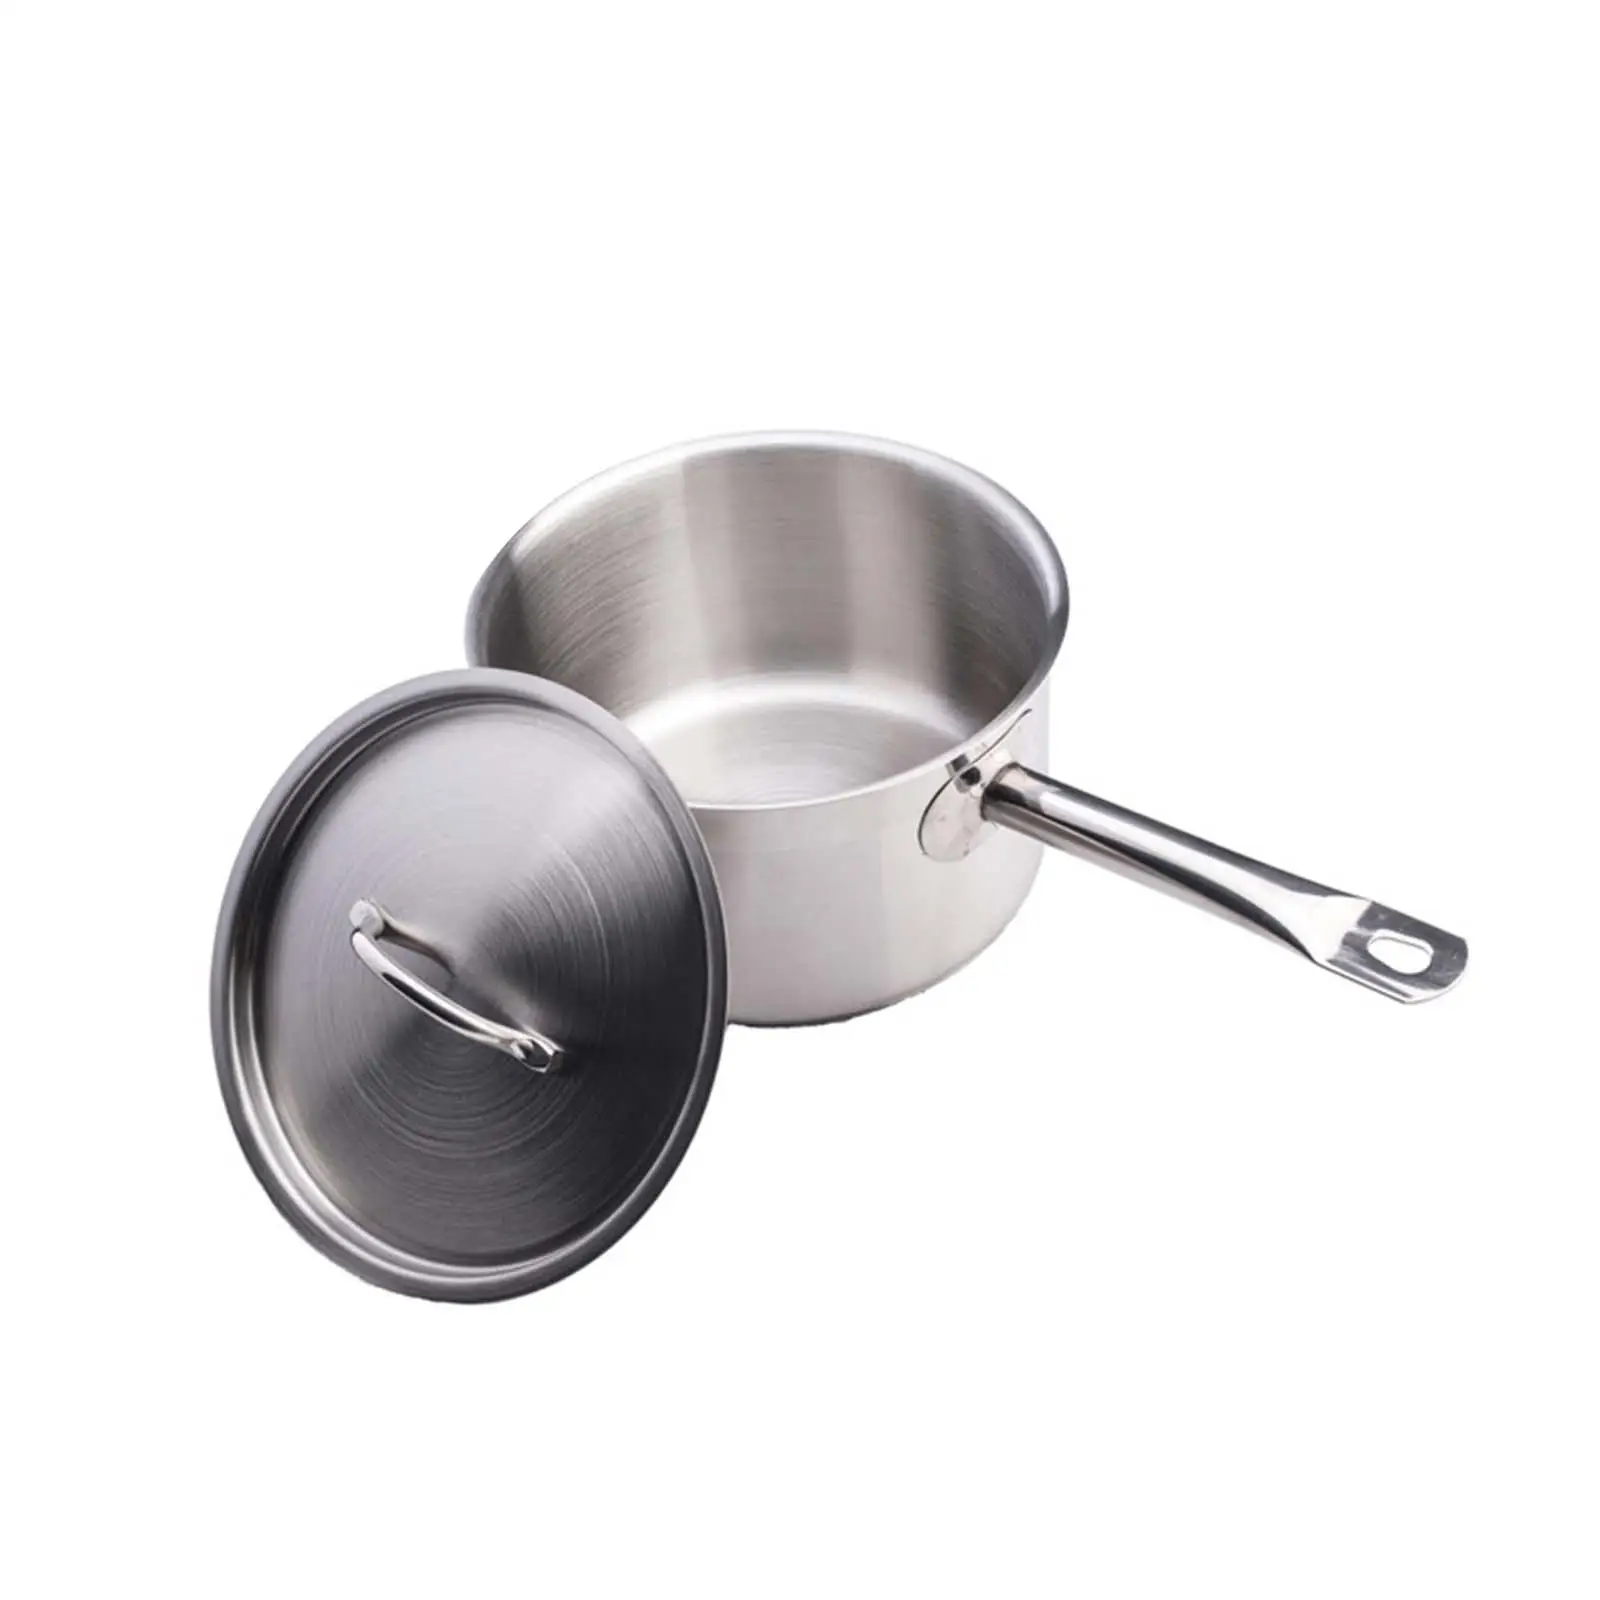 Pasta Cookware Professional 2.6L Stainless Steel Saucepan with Lid for Gravy Home Kitchen Boiling Milk Sauce